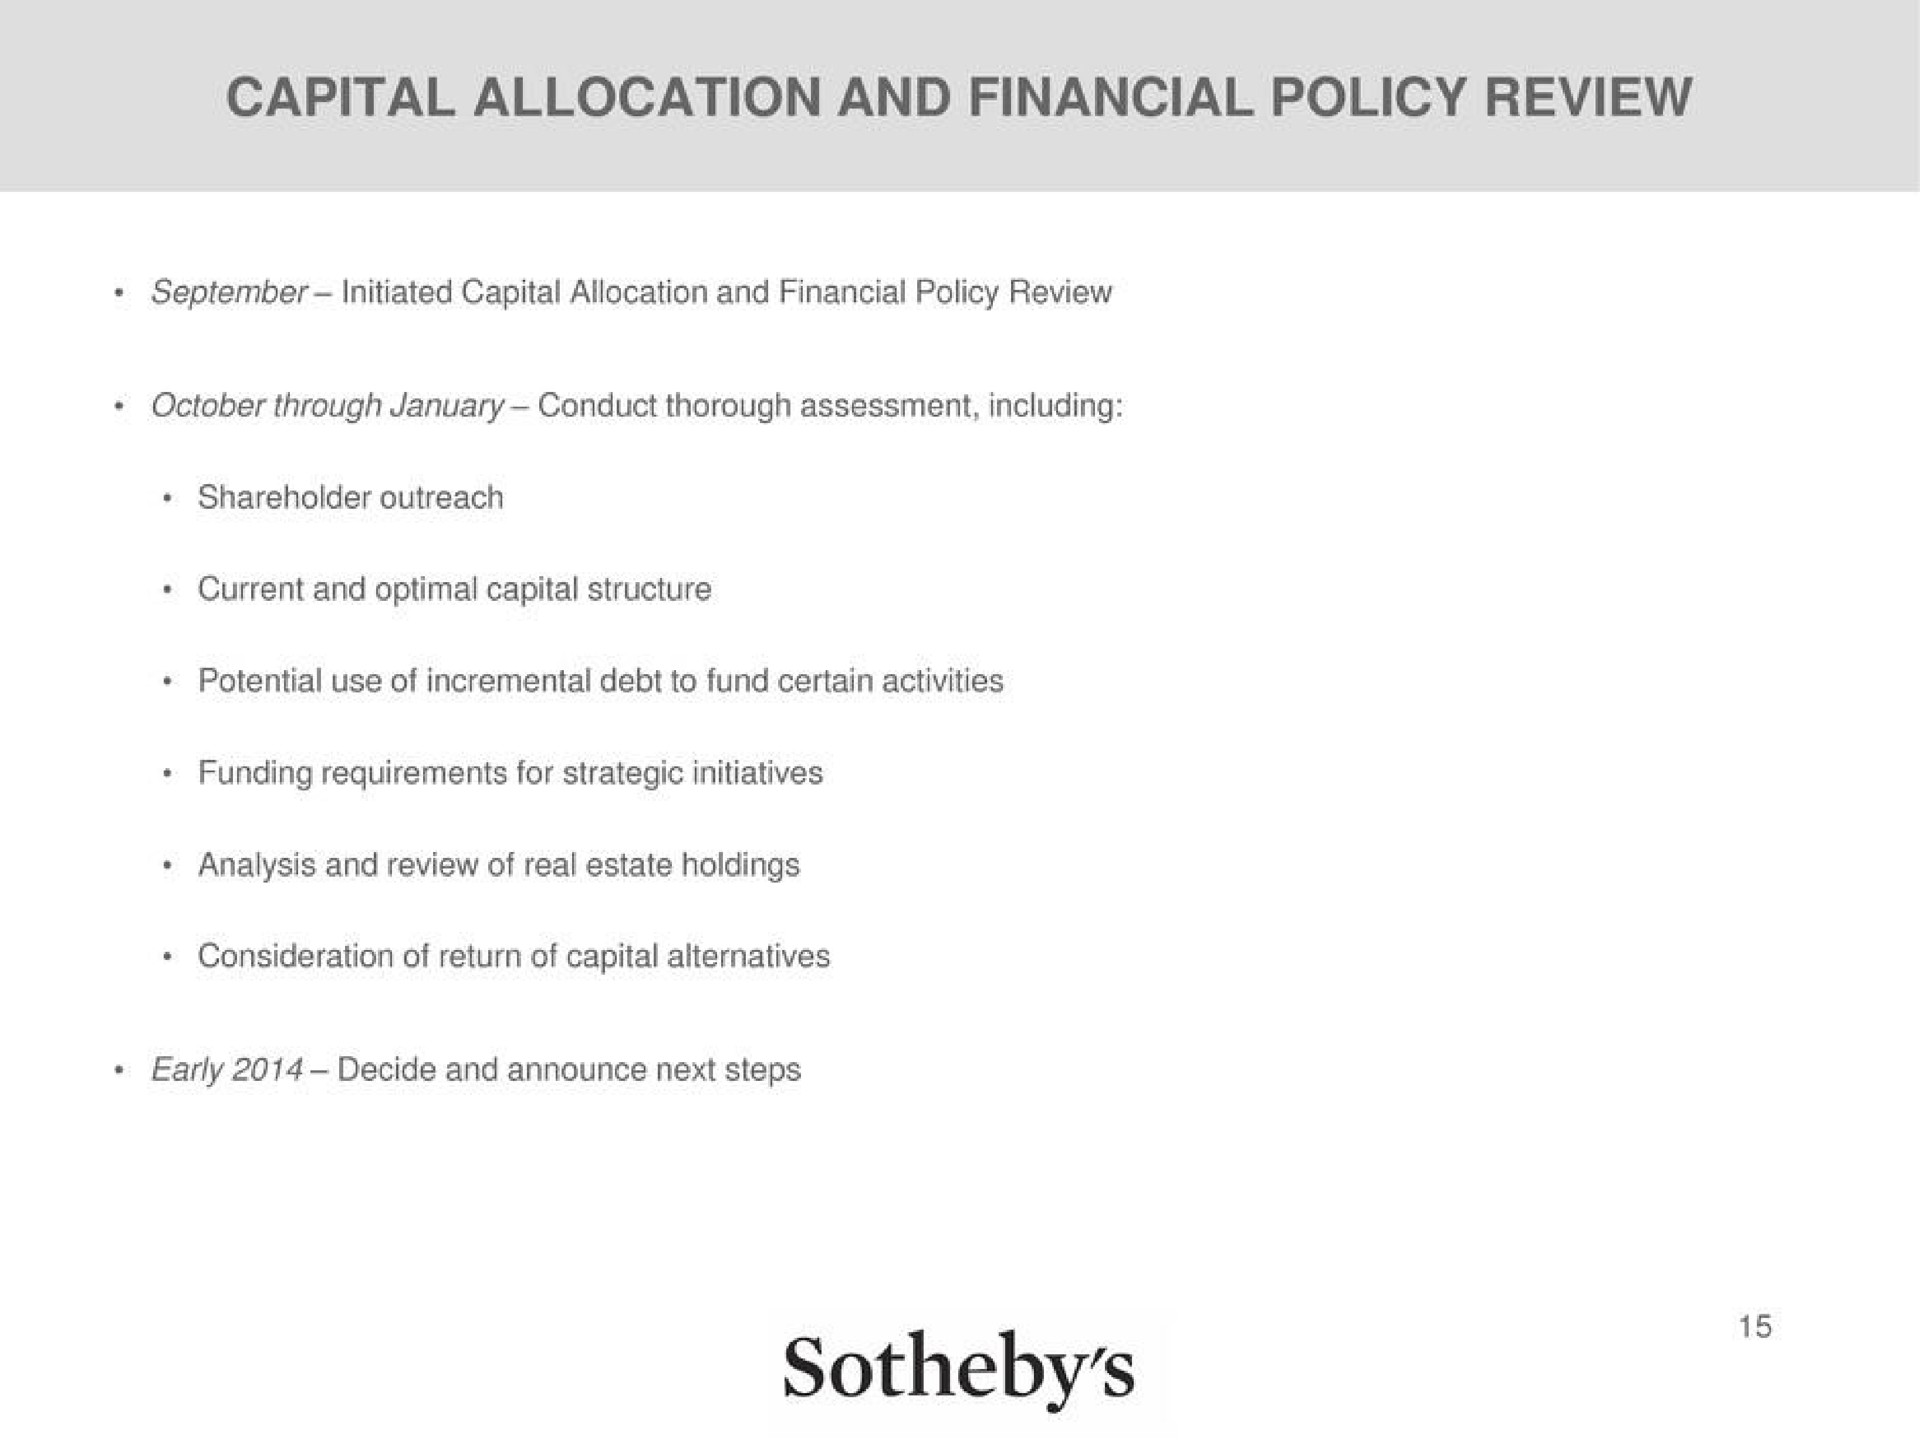 capital allocation and financial policy review | Sotheby's